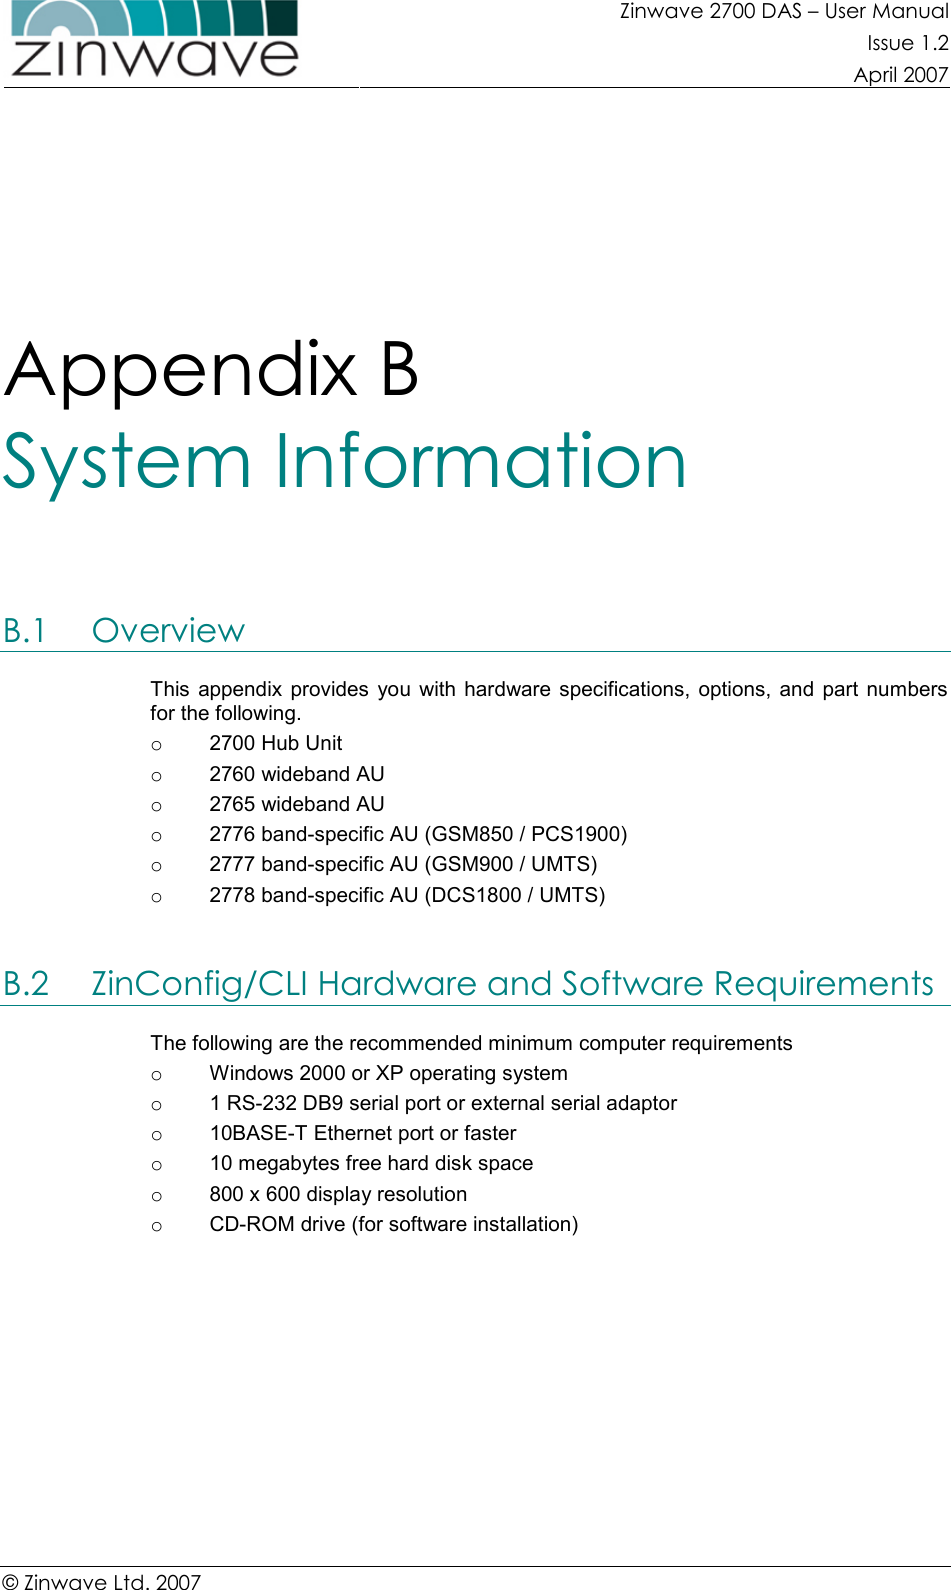 Zinwave 2700 DAS – User Manual Issue 1.2  April 2007  © Zinwave Ltd. 2007  Appendix B  System Information B.1 Overview This  appendix provides  you  with hardware specifications,  options,  and  part  numbers for the following. o  2700 Hub Unit o  2760 wideband AU o  2765 wideband AU o  2776 band-specific AU (GSM850 / PCS1900) o  2777 band-specific AU (GSM900 / UMTS) o  2778 band-specific AU (DCS1800 / UMTS)  B.2 ZinConfig/CLI Hardware and Software Requirements The following are the recommended minimum computer requirements o  Windows 2000 or XP operating system o  1 RS-232 DB9 serial port or external serial adaptor o  10BASE-T Ethernet port or faster o  10 megabytes free hard disk space o  800 x 600 display resolution o  CD-ROM drive (for software installation)   